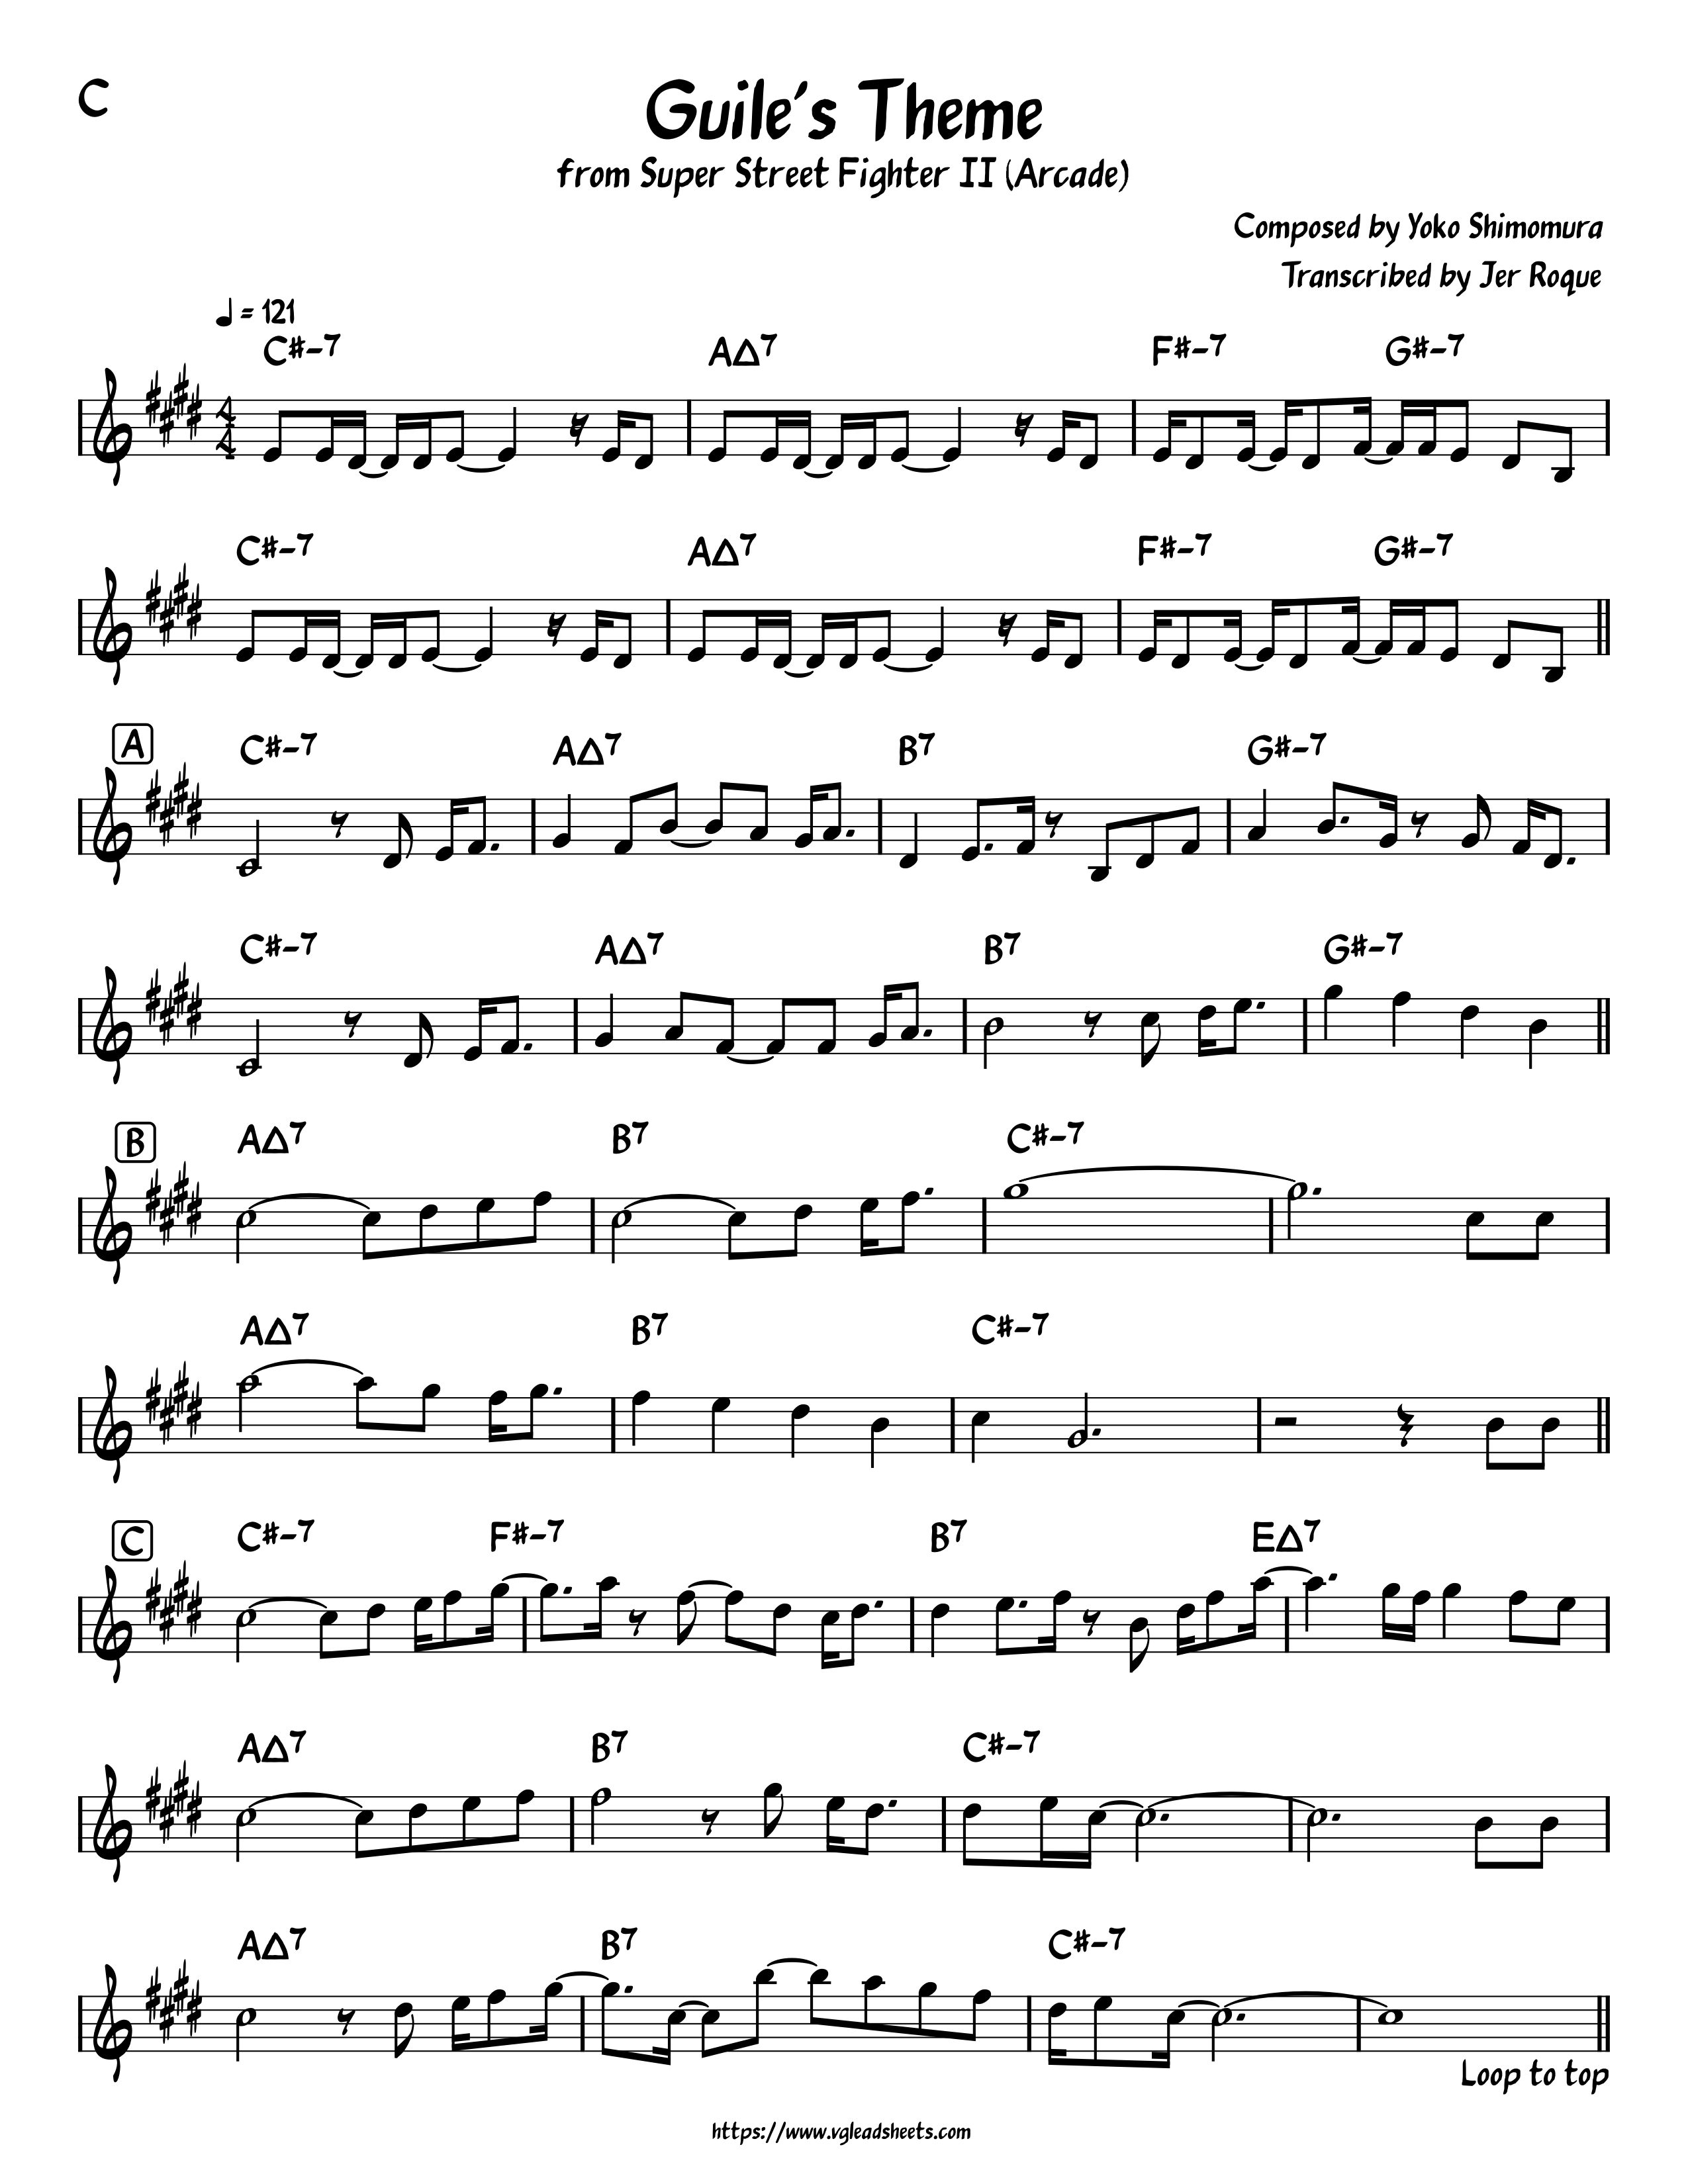 Street Fighter II Guile Theme 1 Sheet music for Violin (String